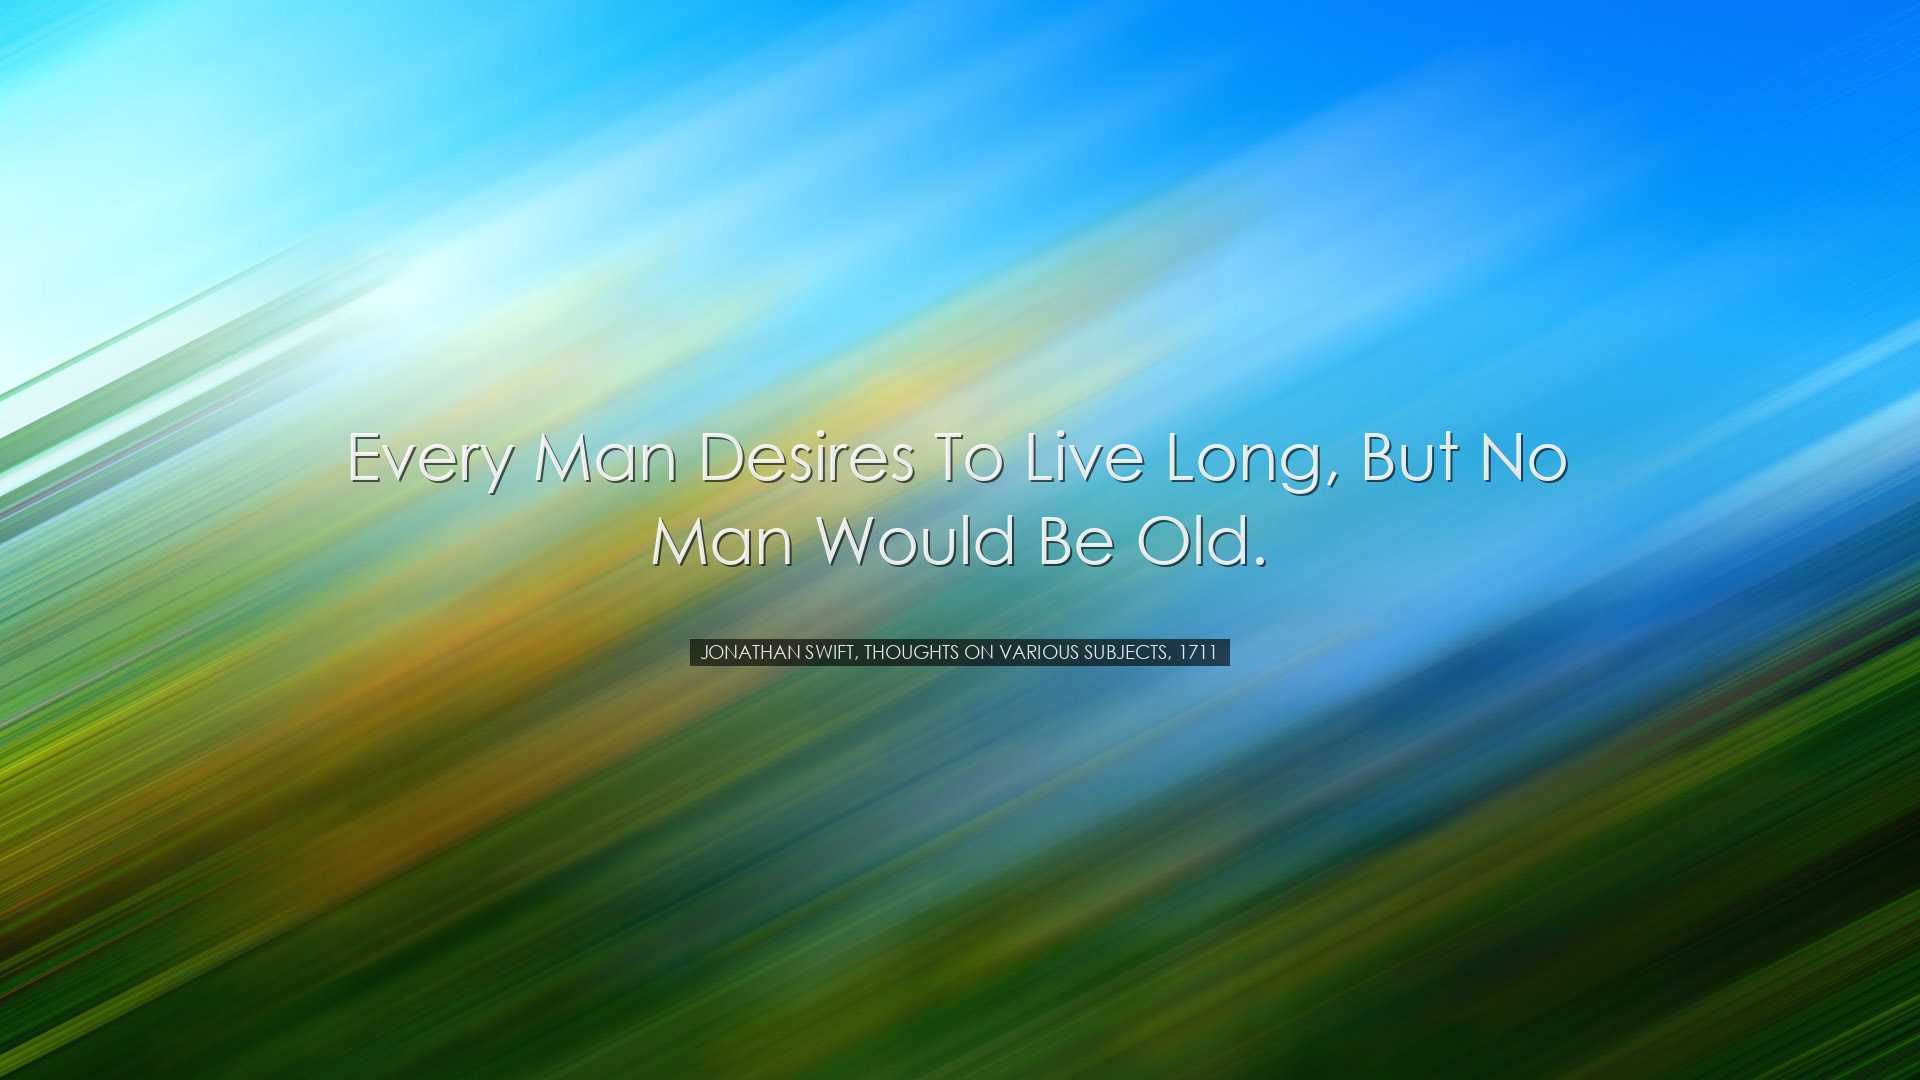 Every man desires to live long, but no man would be old. - Jonatha